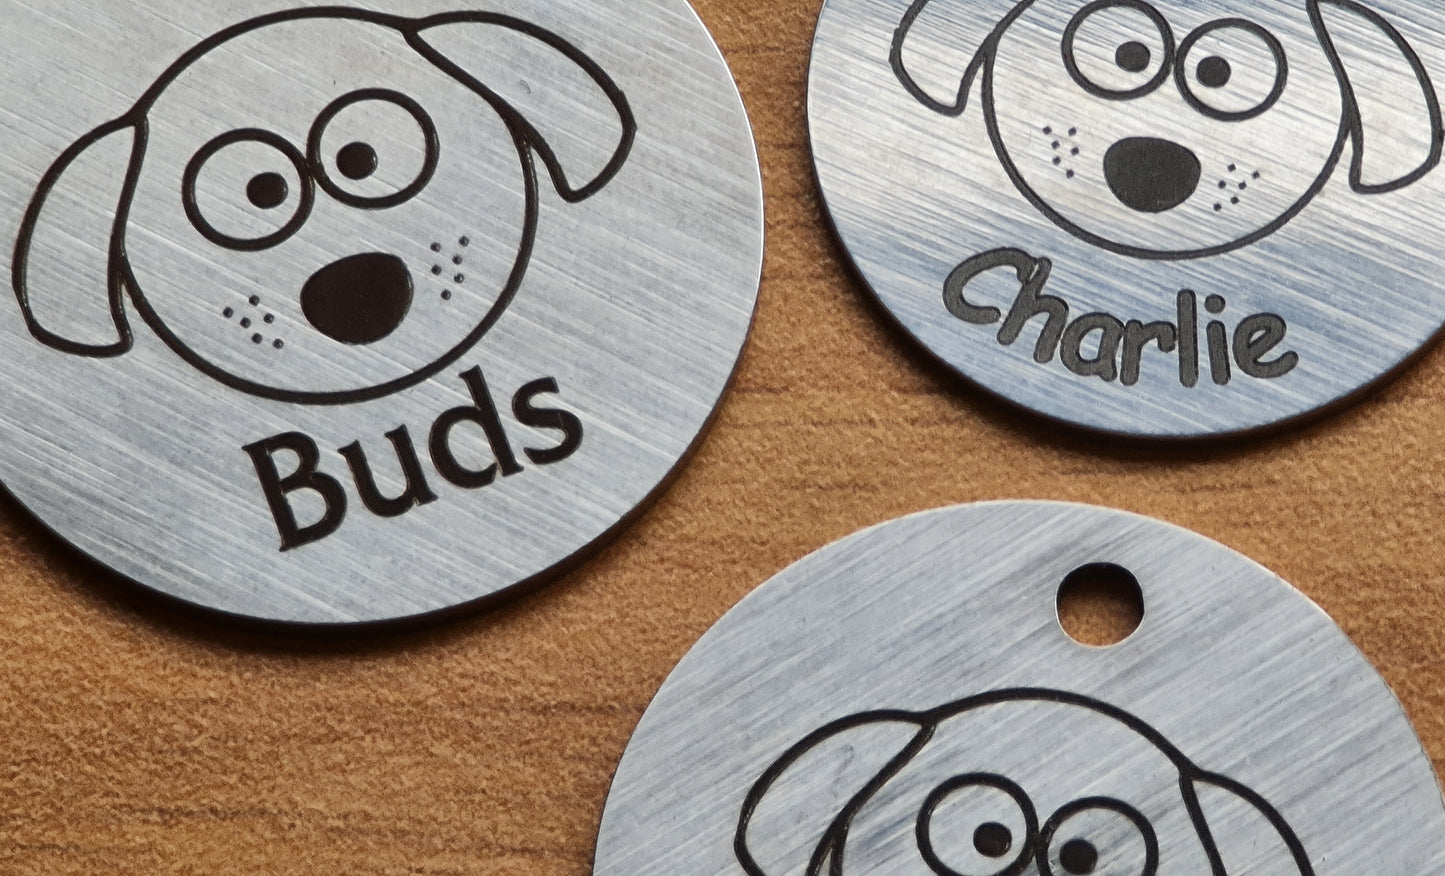 20mm Engraved Stainless Steel "Goofy" Dog Tag / ID Disc